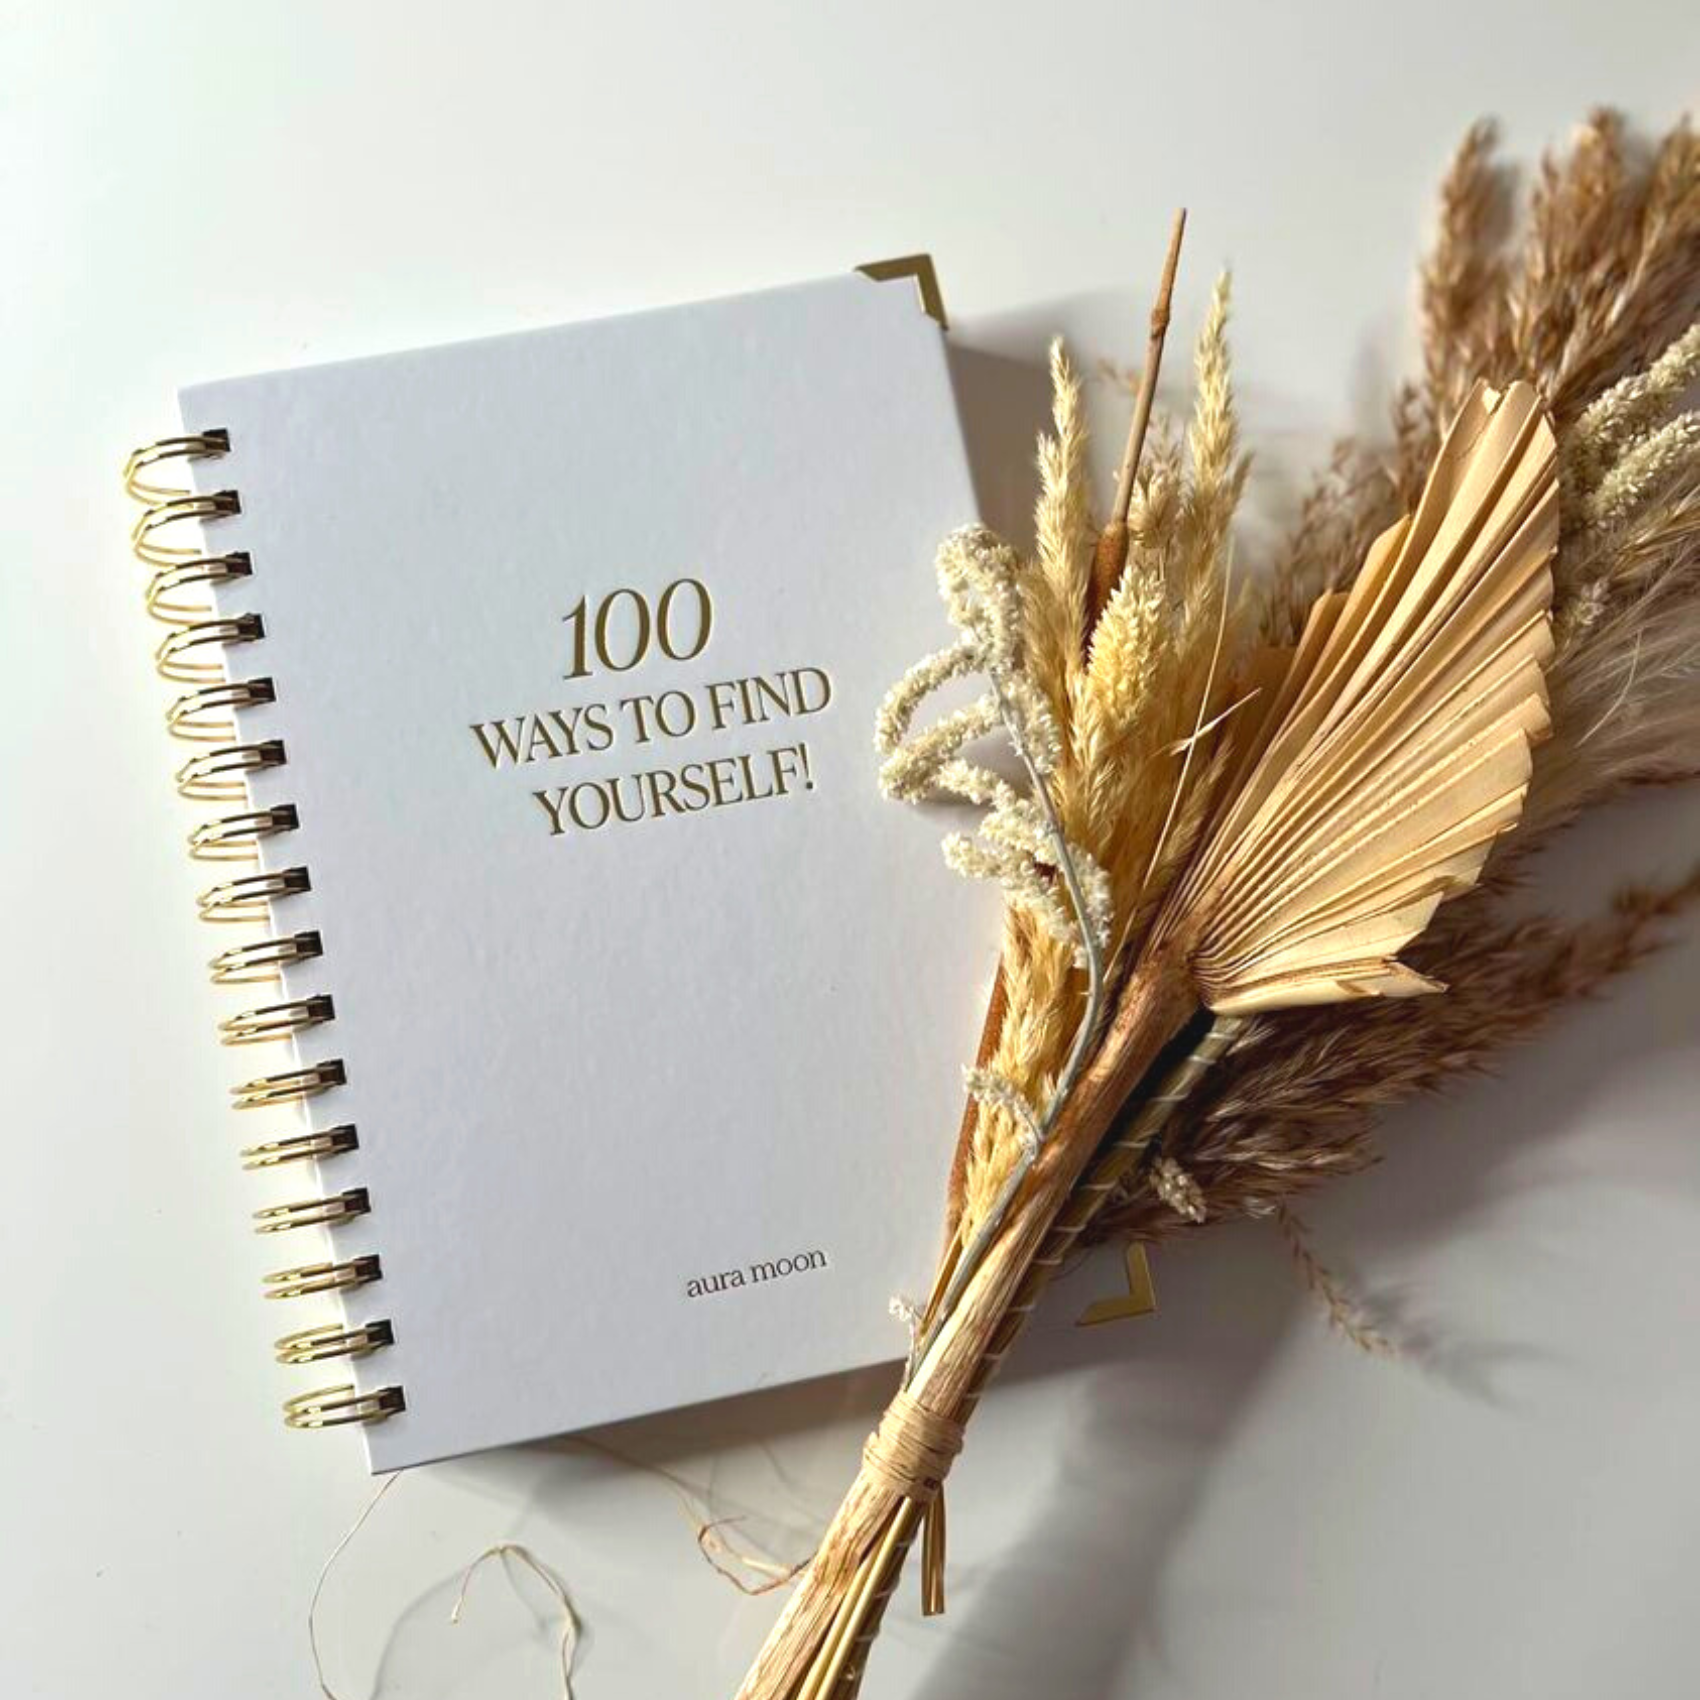 100 ways to find yourself journal